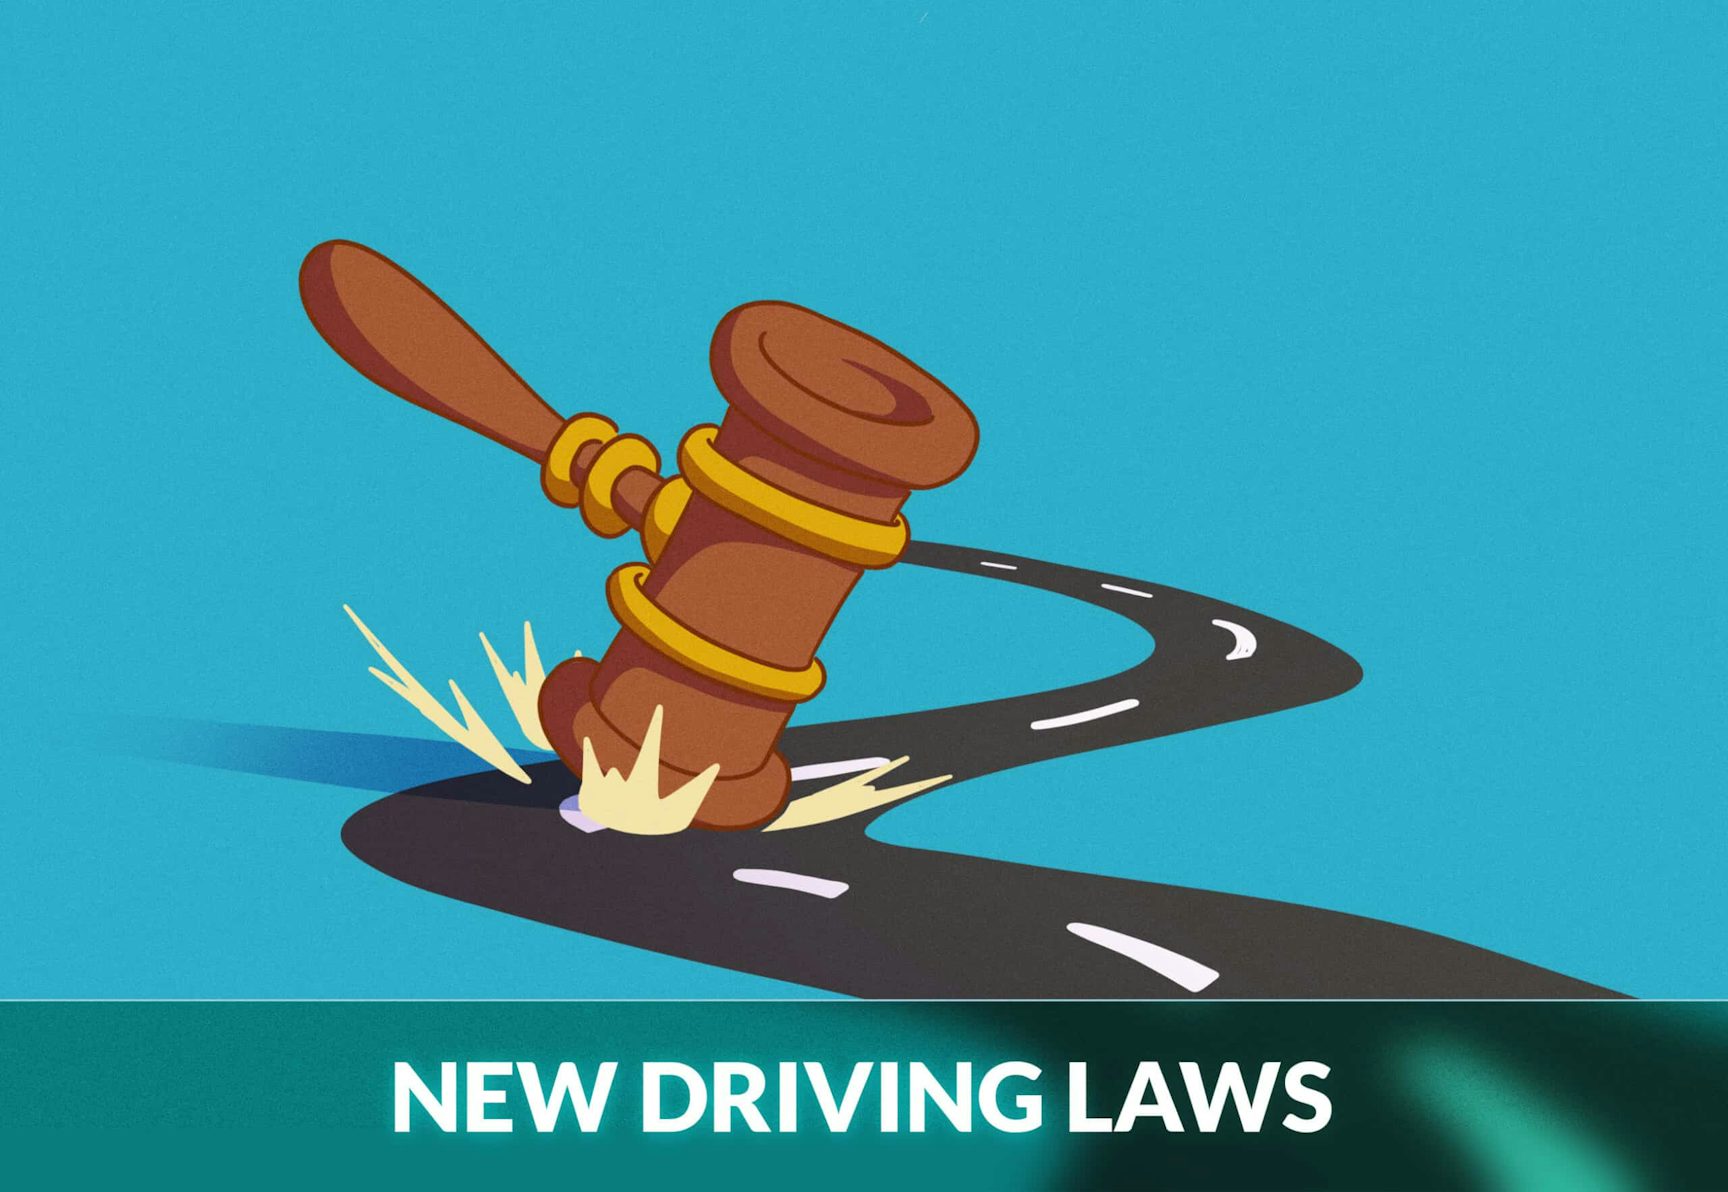 New Driving Laws. How to Keep Your Driver's License in 2020